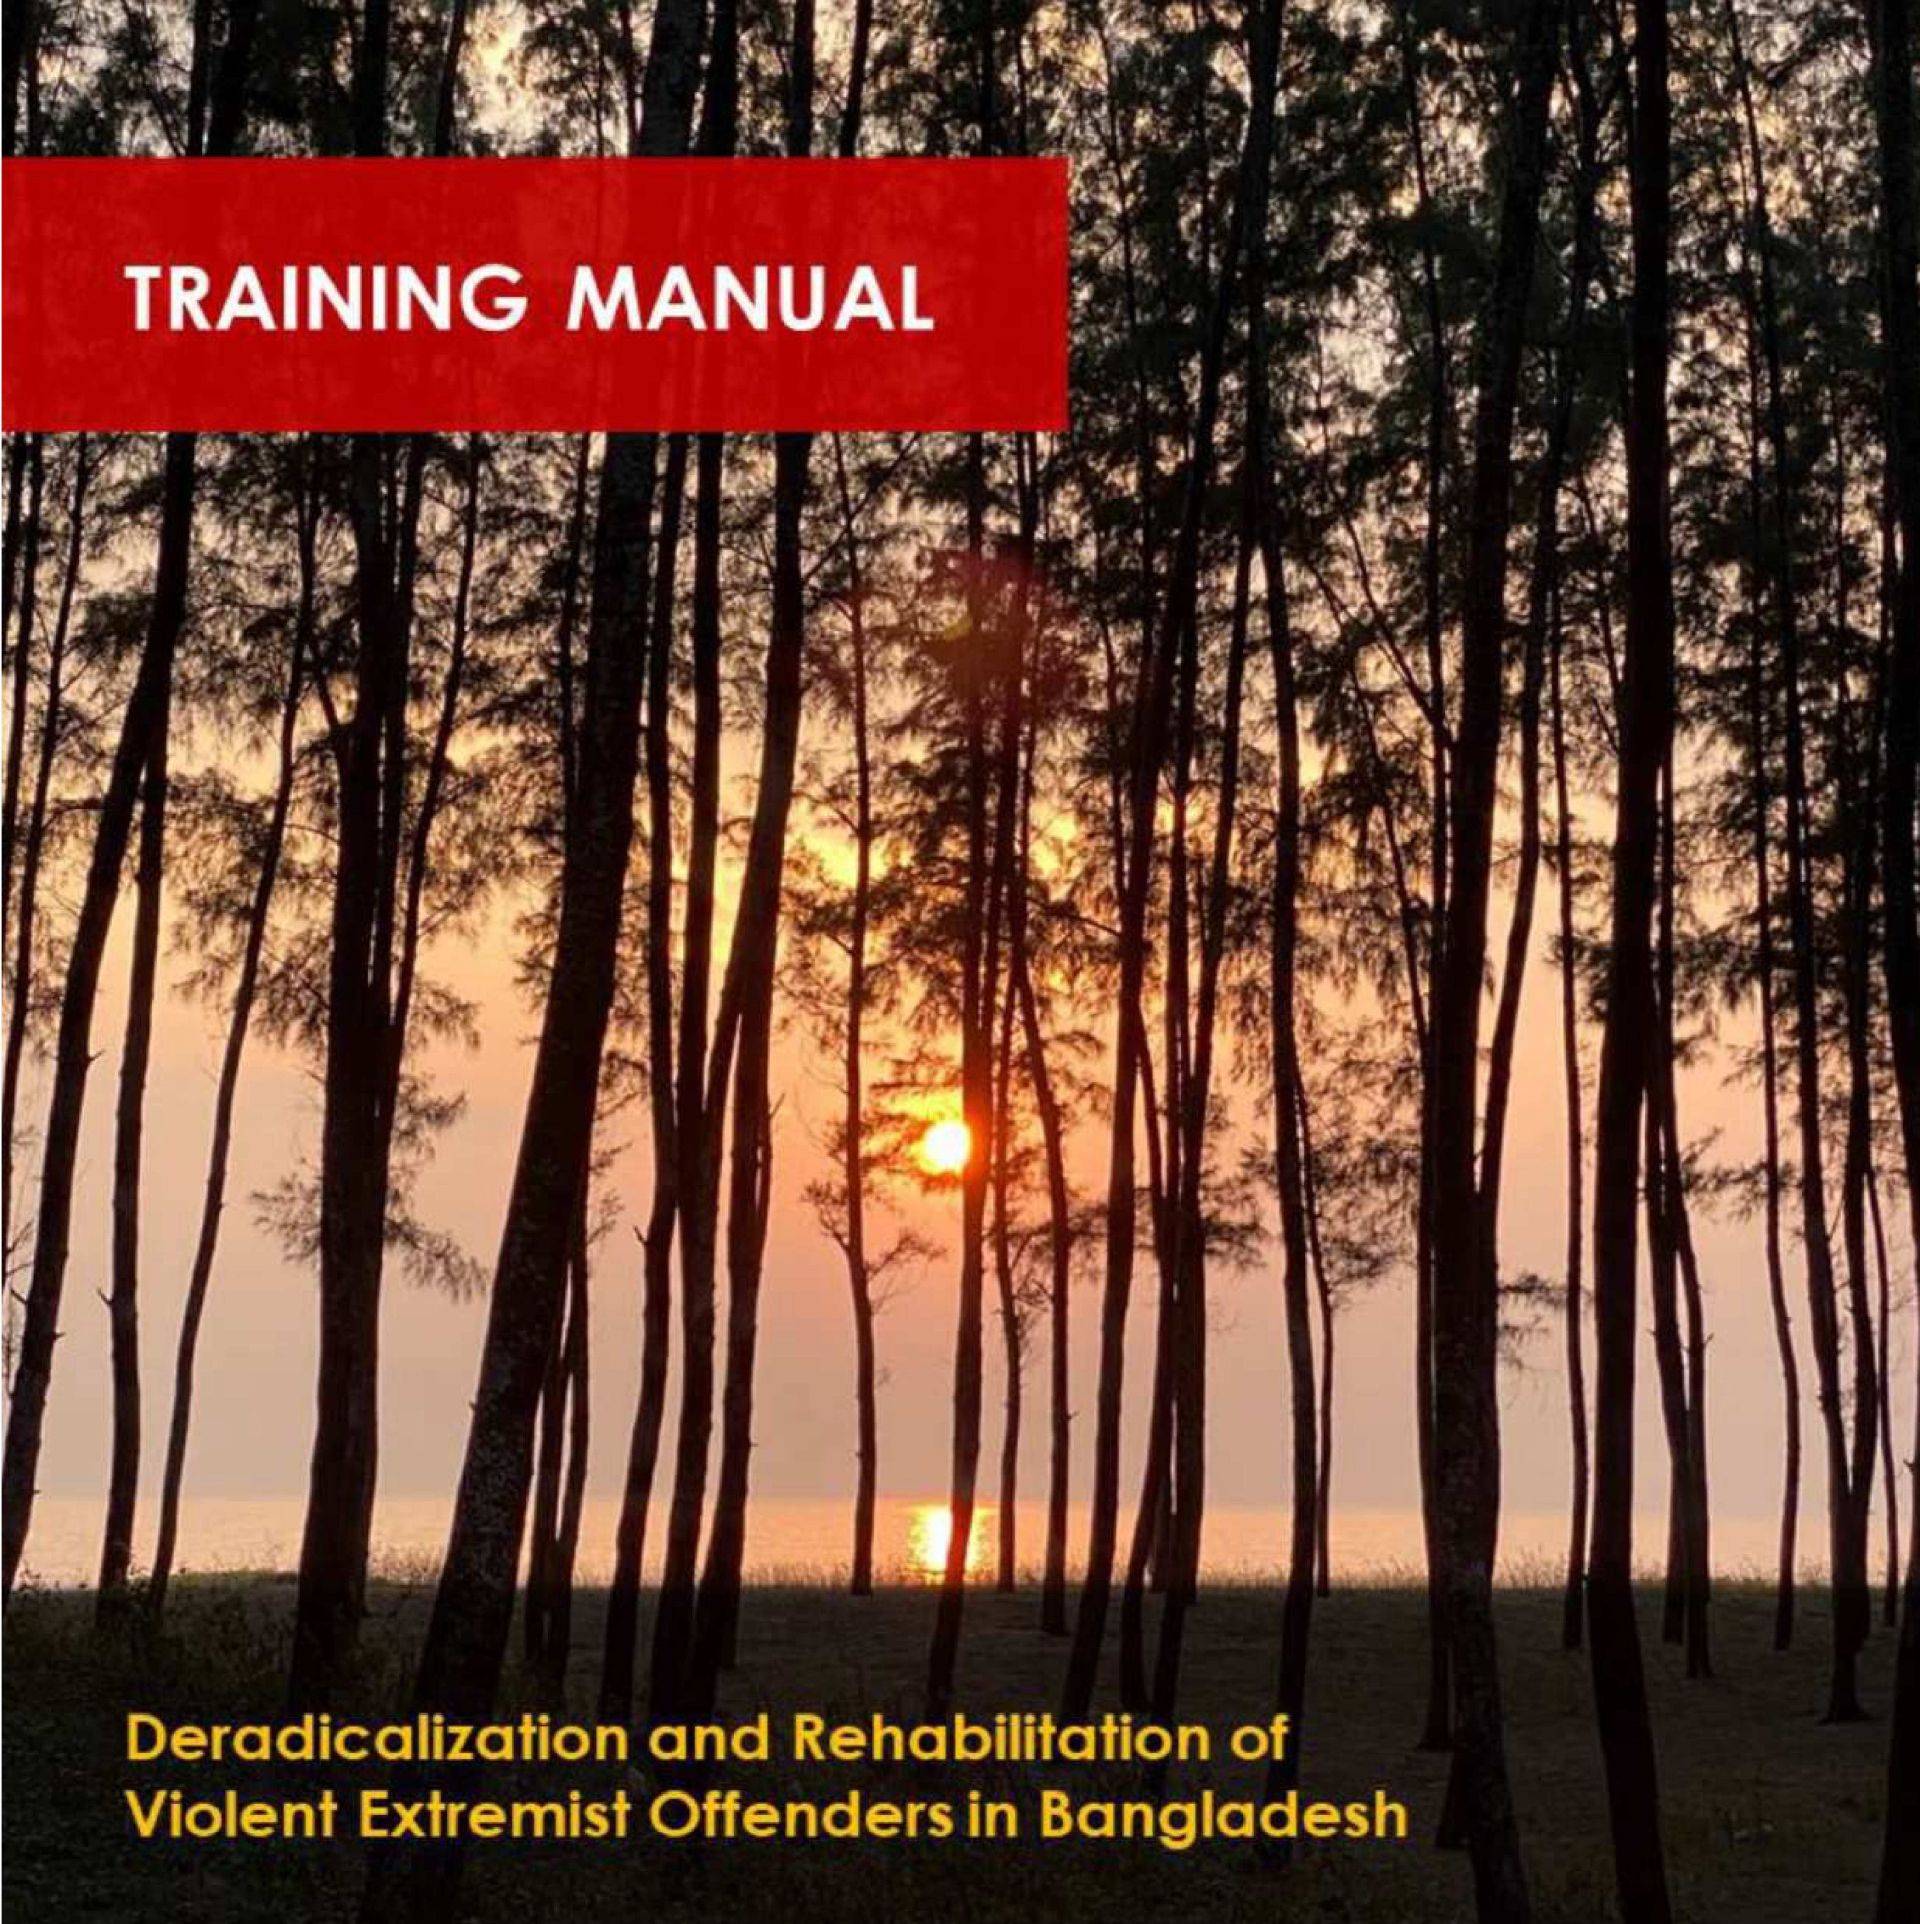 The Training Manual for Deradicalization and Rehabilitation of Violent Extremist Offenders in Bangladesh